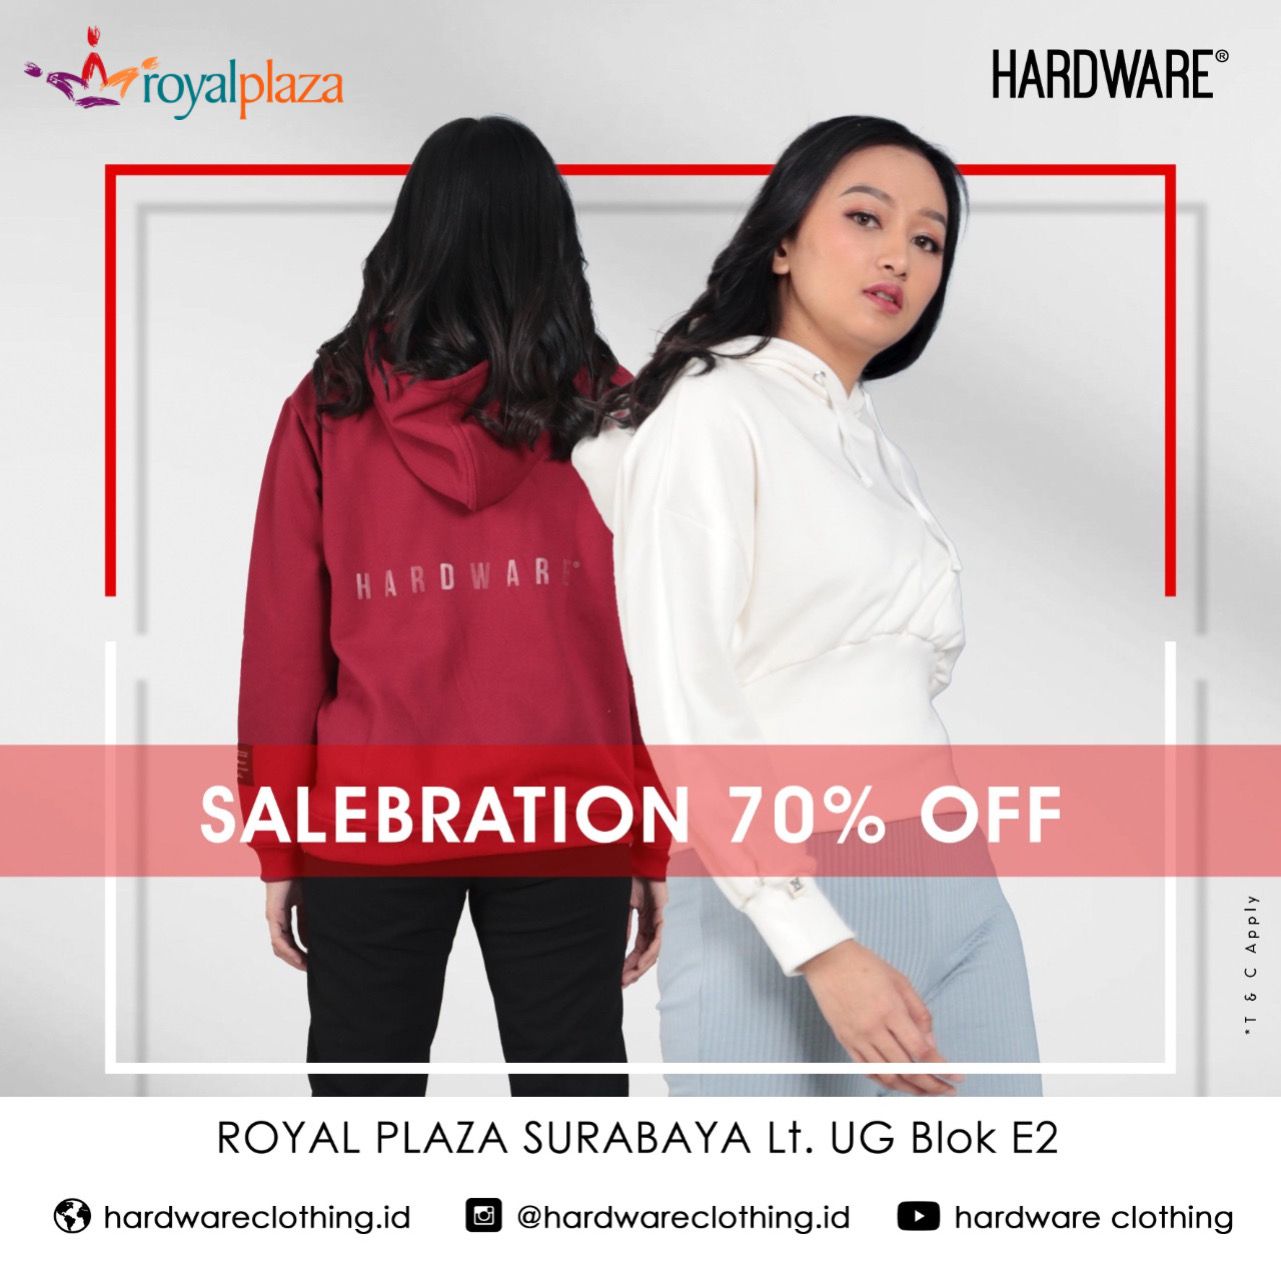 SALE-BRATION DISCOUNT UP TO 70%